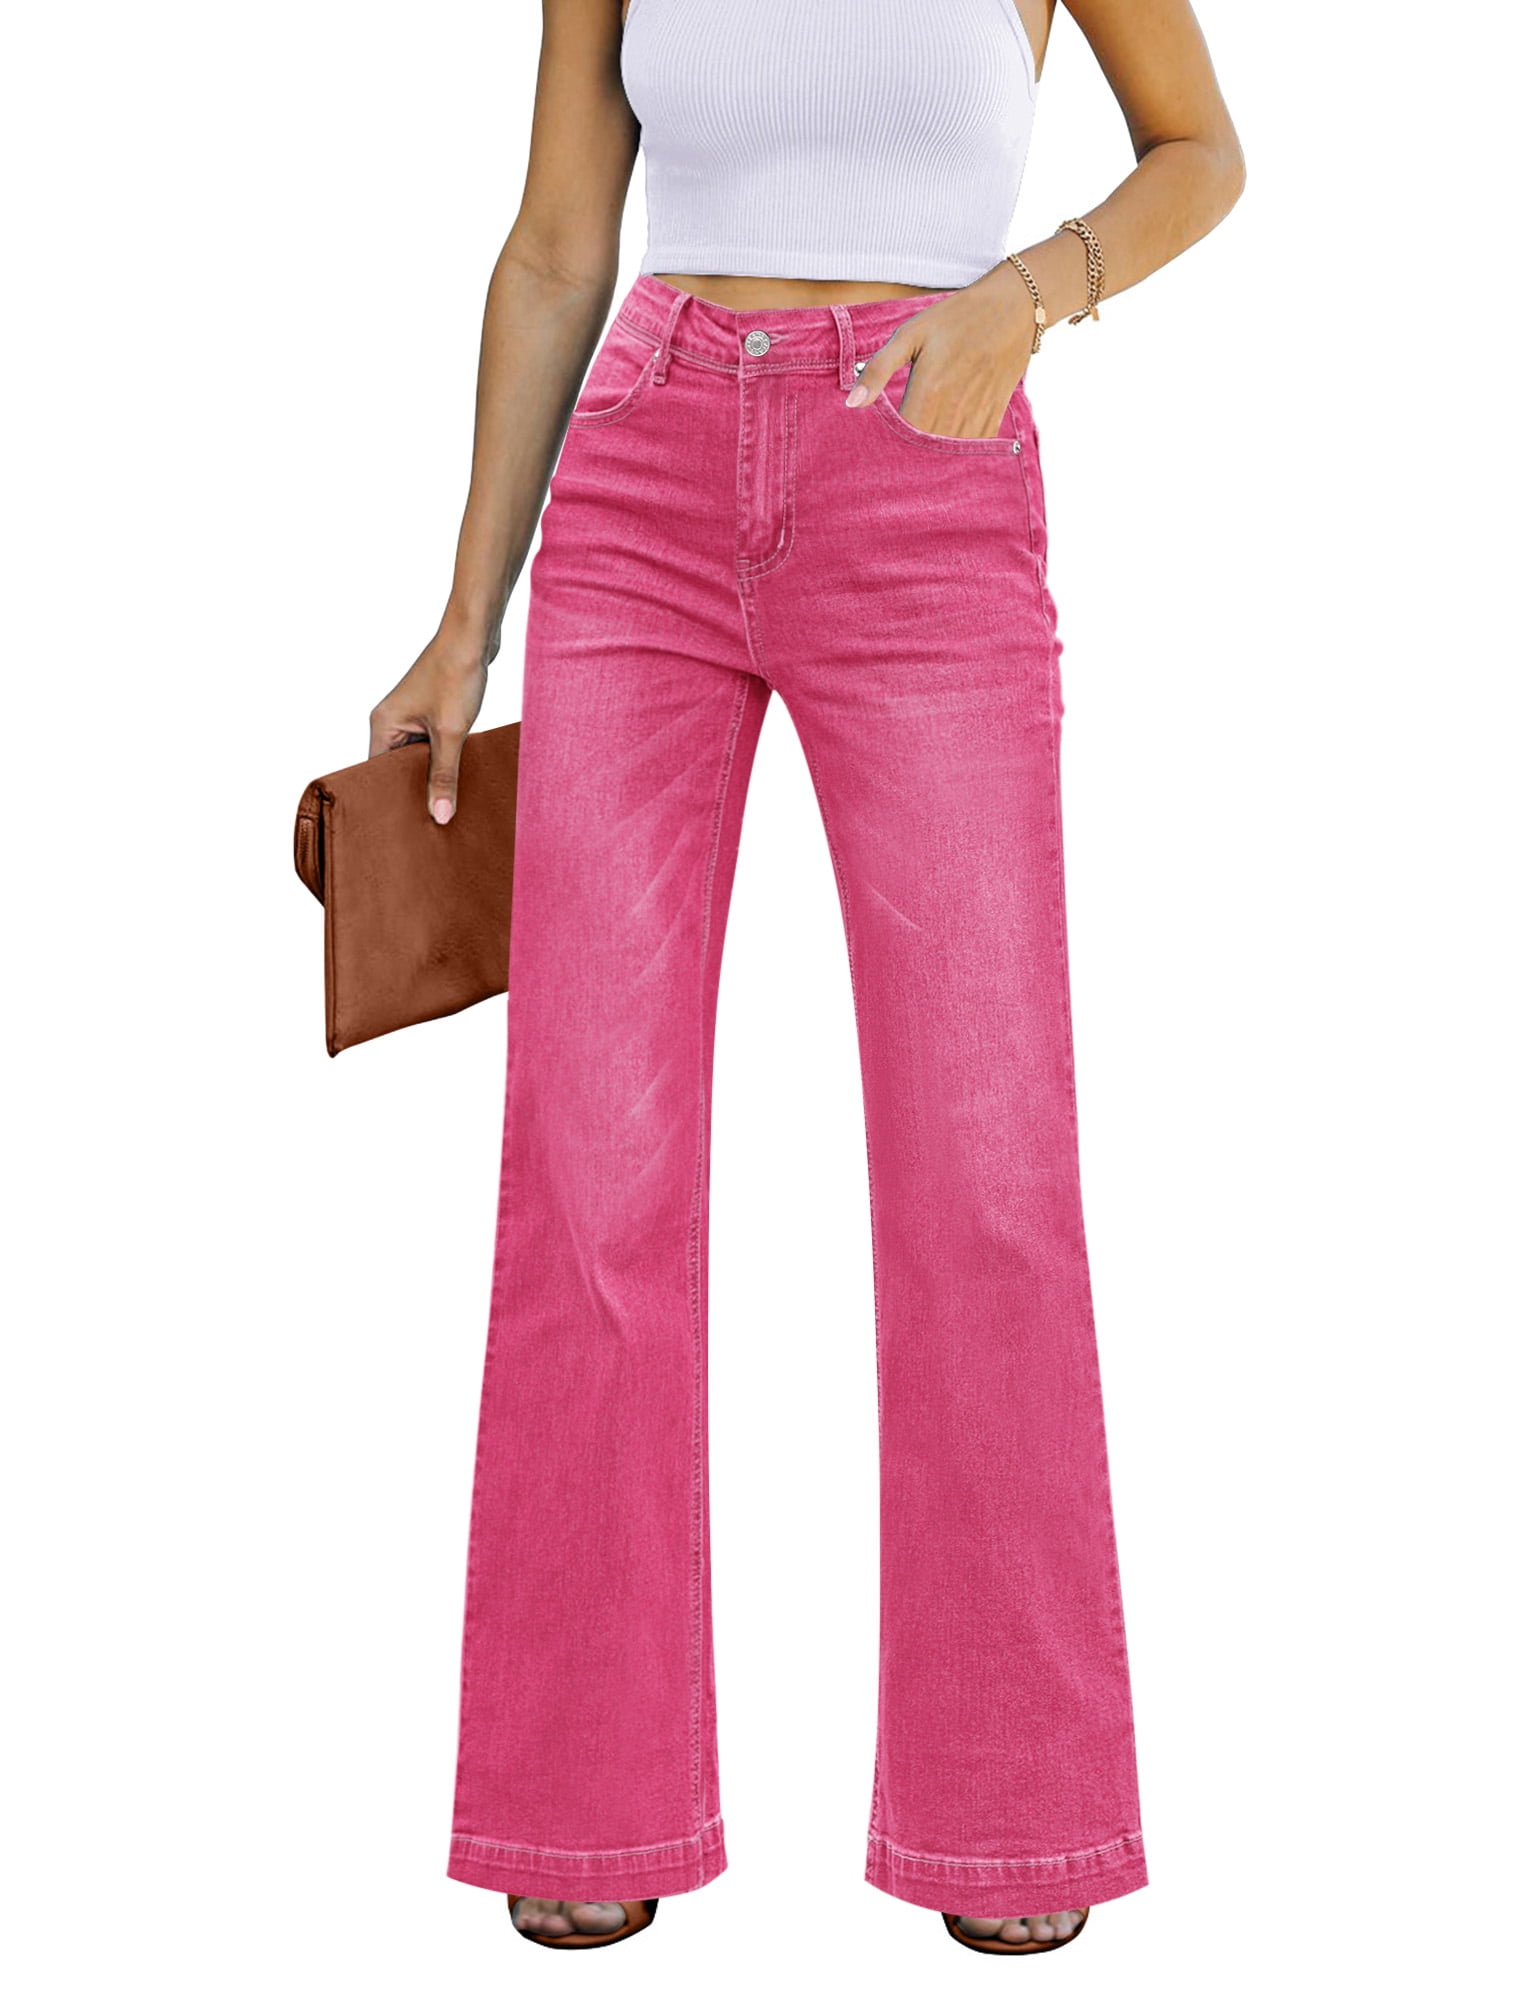 Vetinee Women's Chic Hot Pink Flare Jeans Classic Waisted Wide Leg Stretch Denim Jeans Size L Fit Size 12 Size 14 - Walmart.com